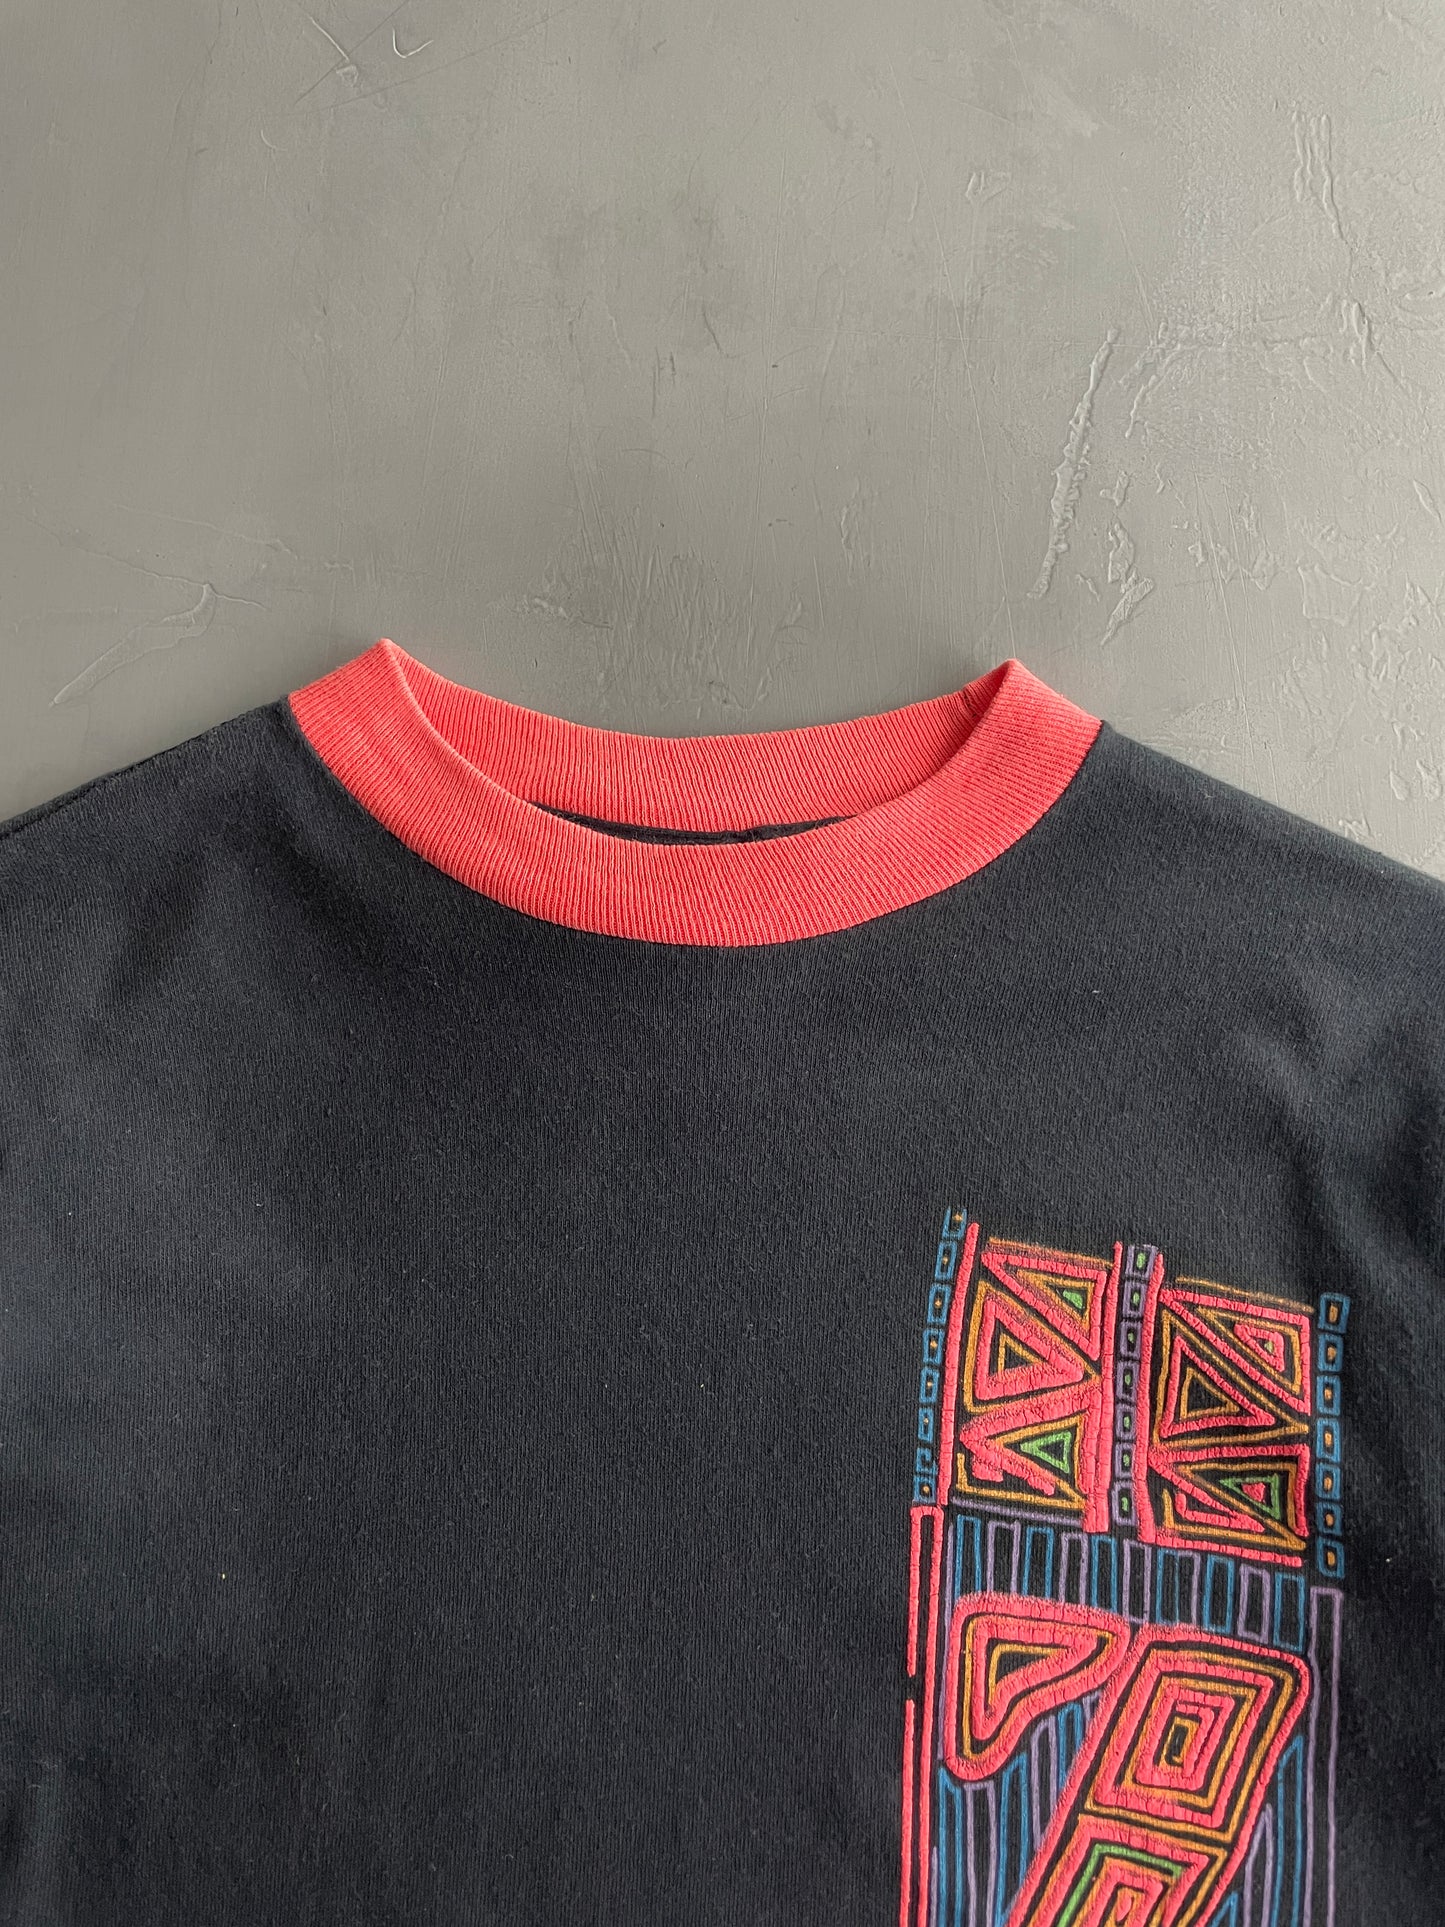 80's Jimmy Z Surf Tee [S]